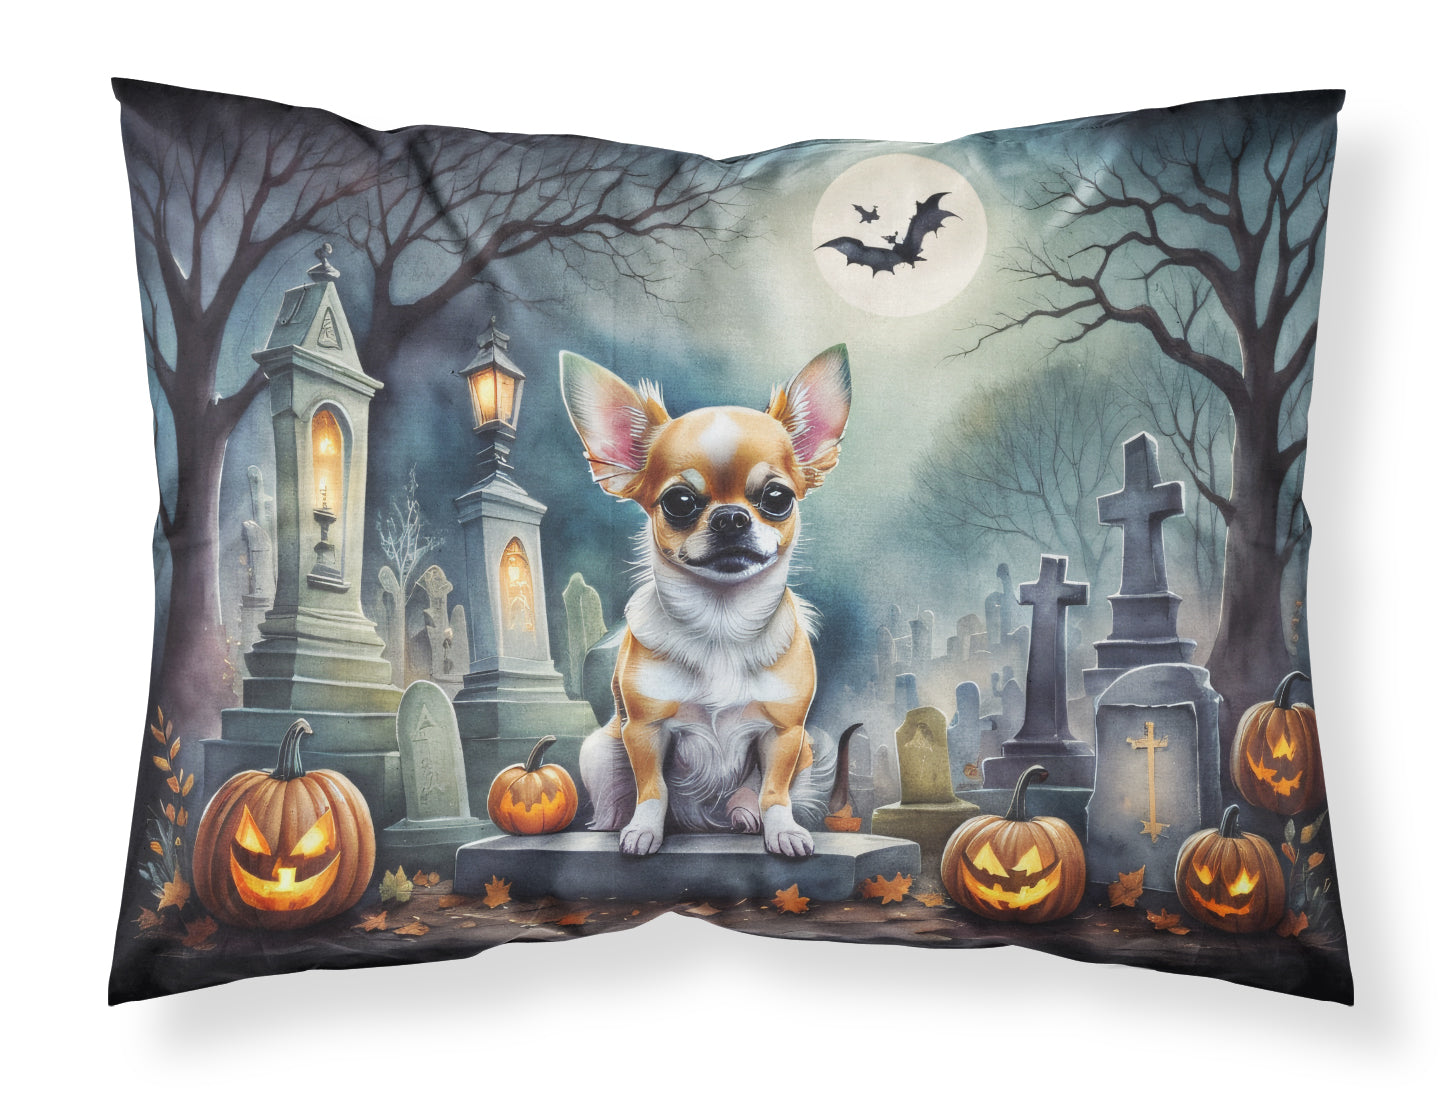 Buy this Chihuahua Spooky Halloween Fabric Standard Pillowcase